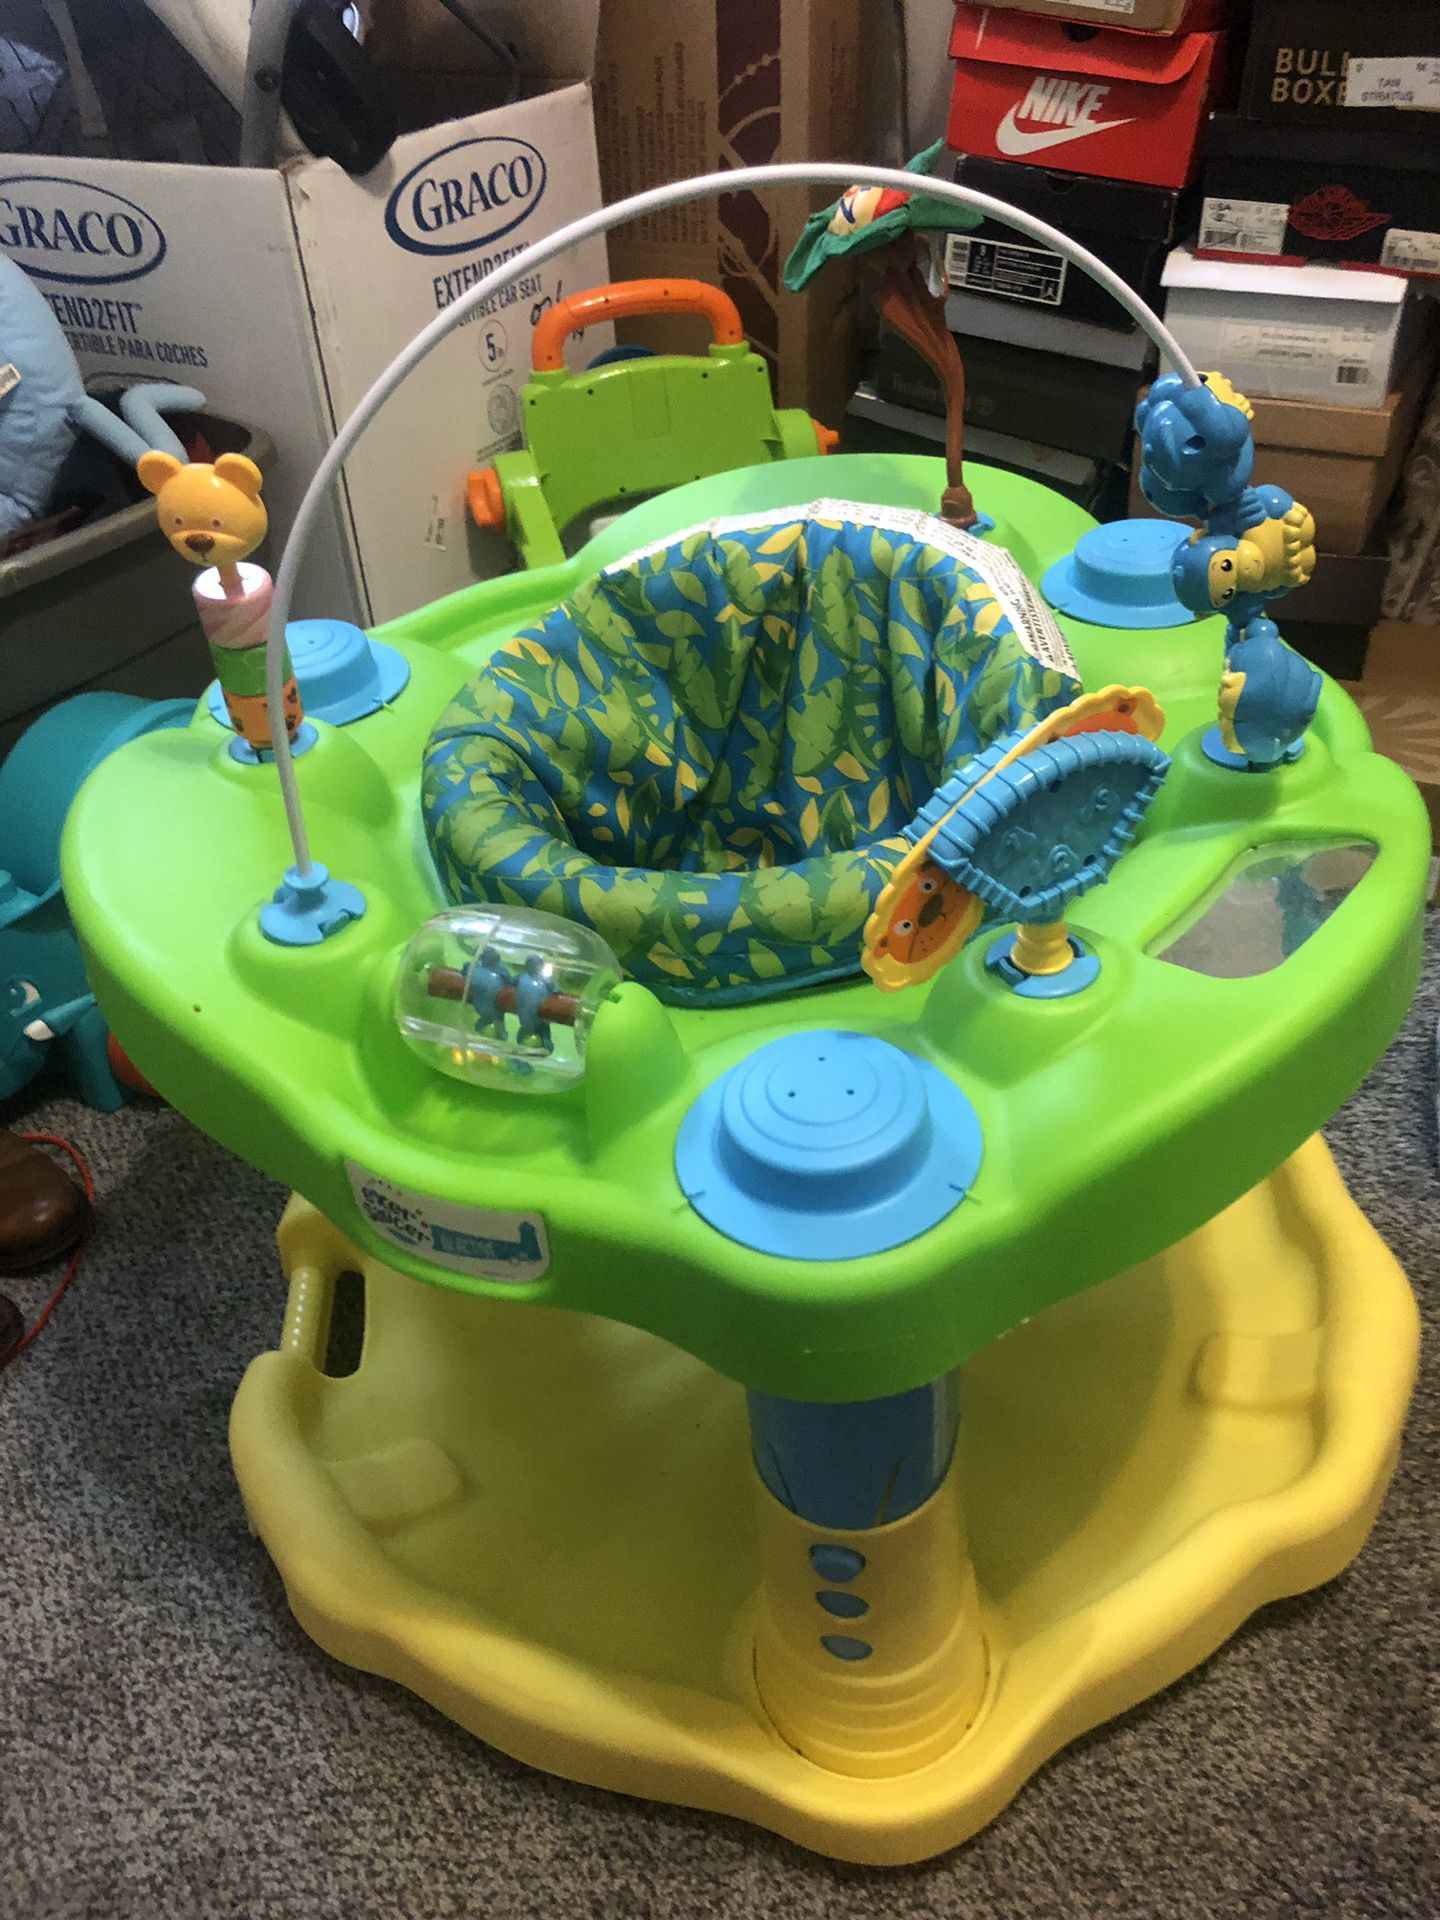 Baby toys (saucer)